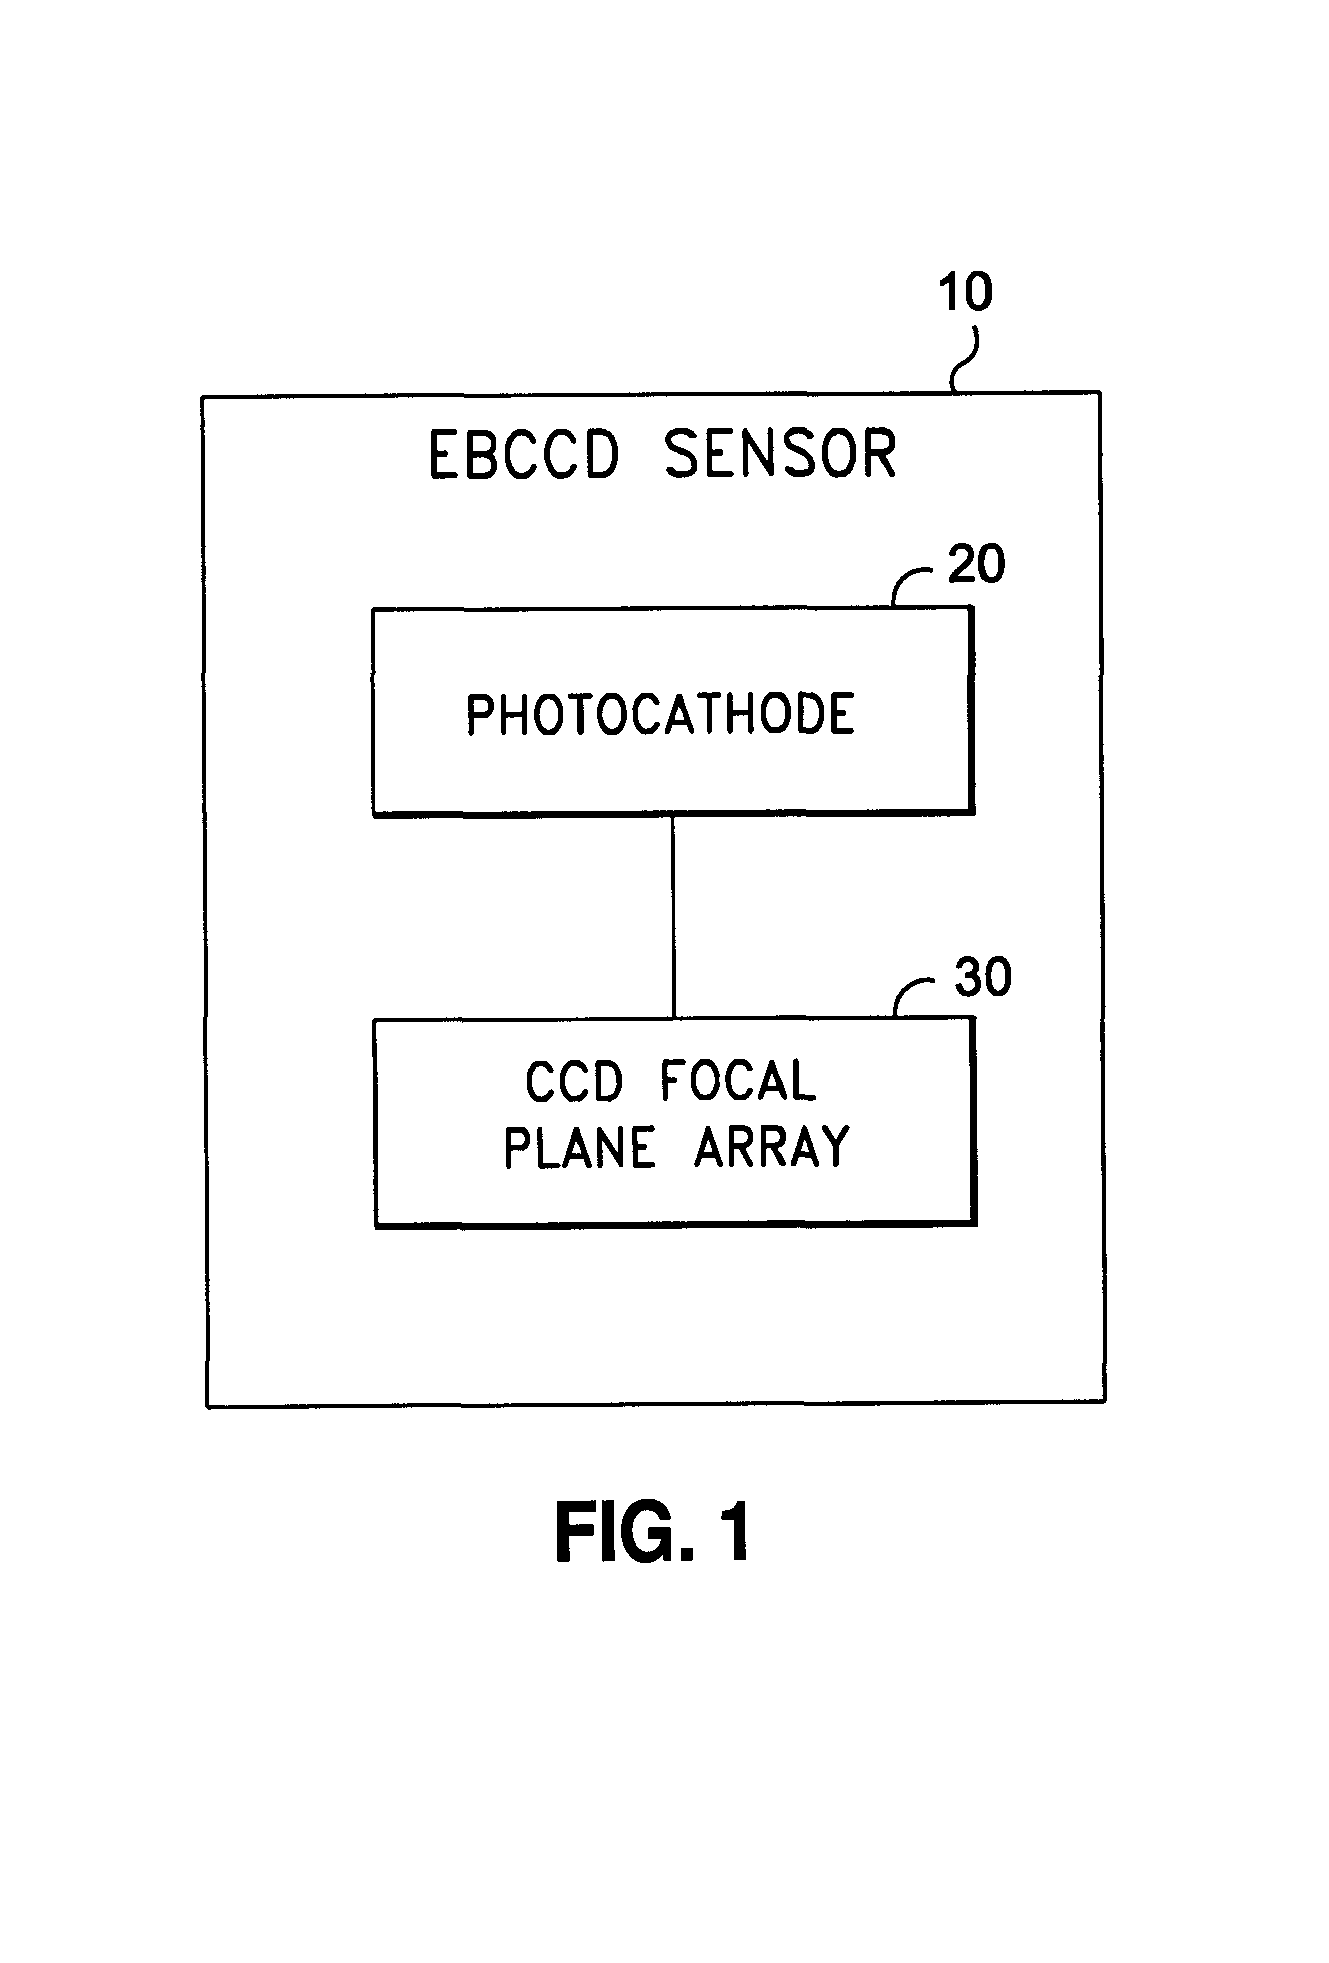 Automatic control method and system for electron bombarded charge coupled device ("EBCCD") sensor